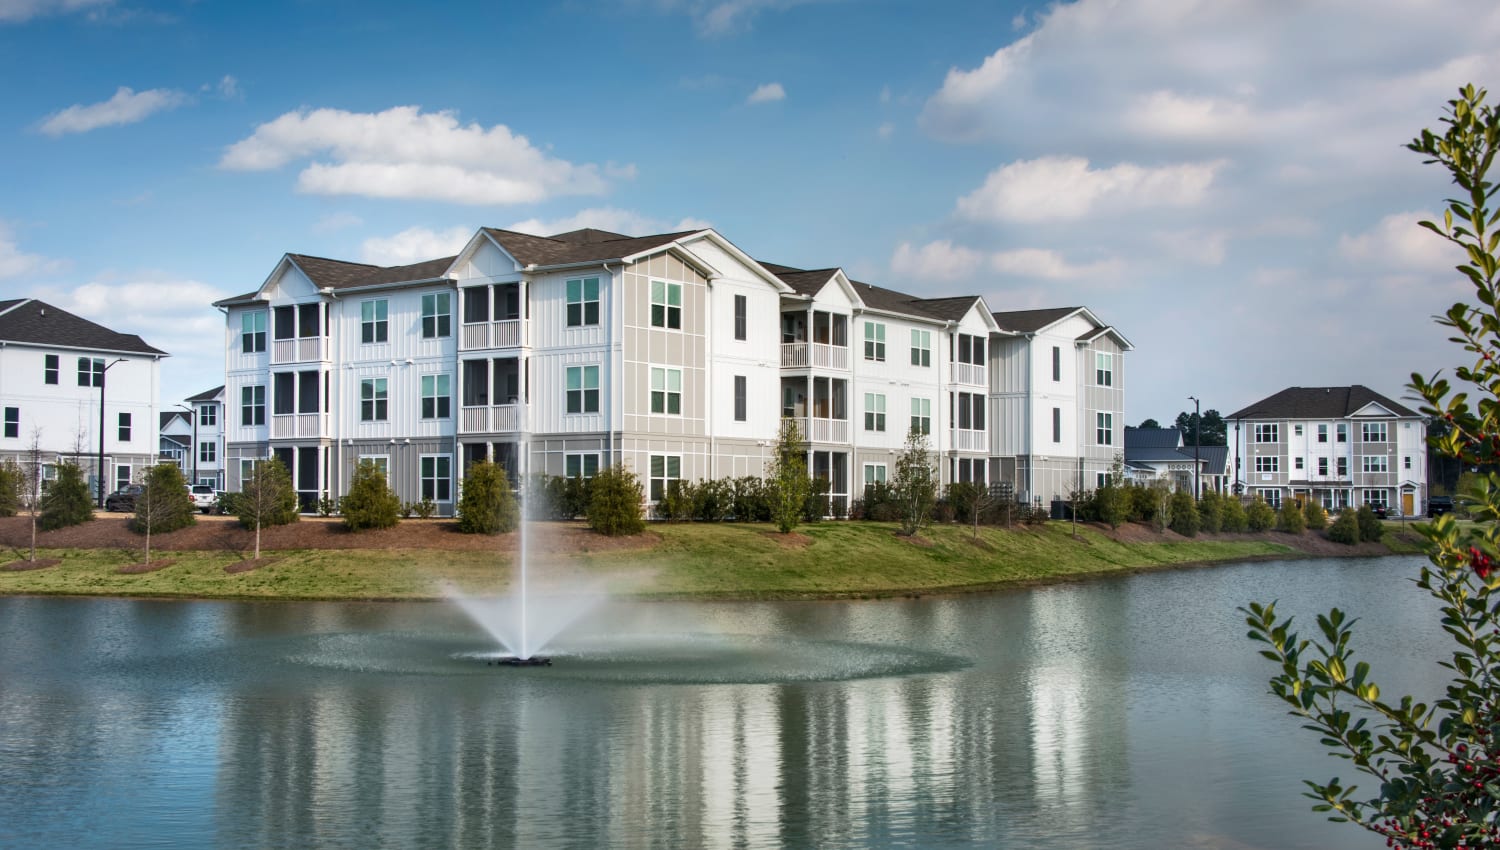 Lake outside of the community at Capital Crest at Godley Station in Savannah, Georgia